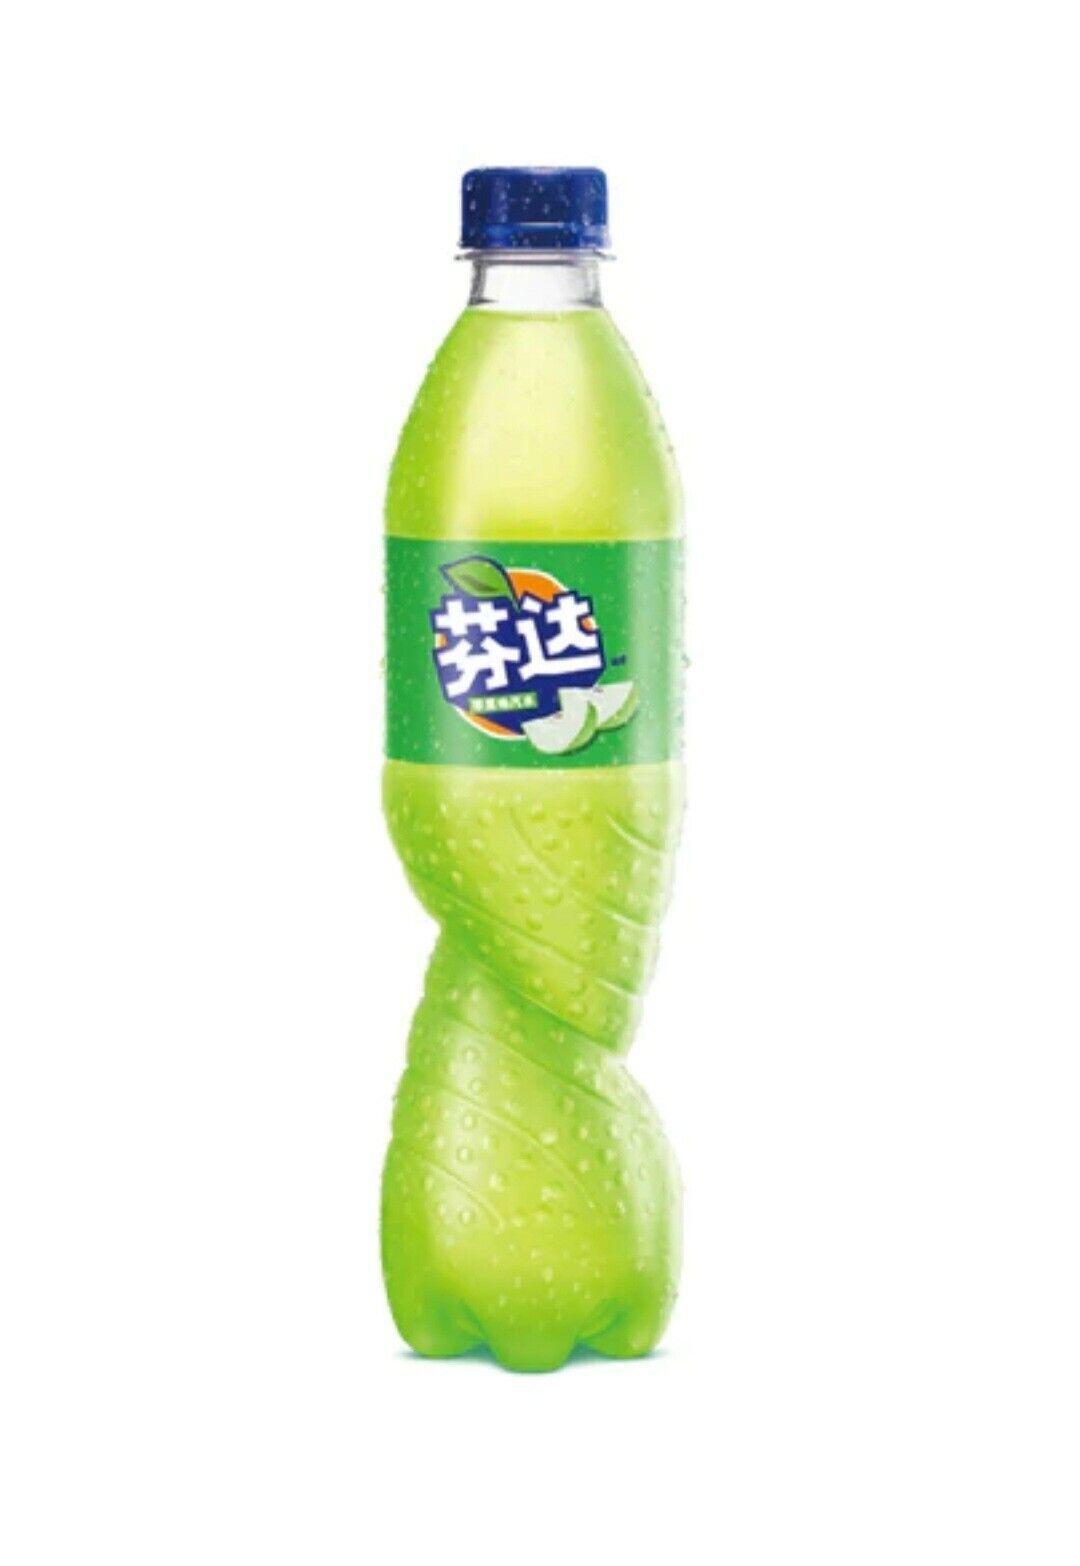 Primary image for 48 Exotic Fanta China Green Apple Soft Drink 500ml Each Bottle -Free Shipping